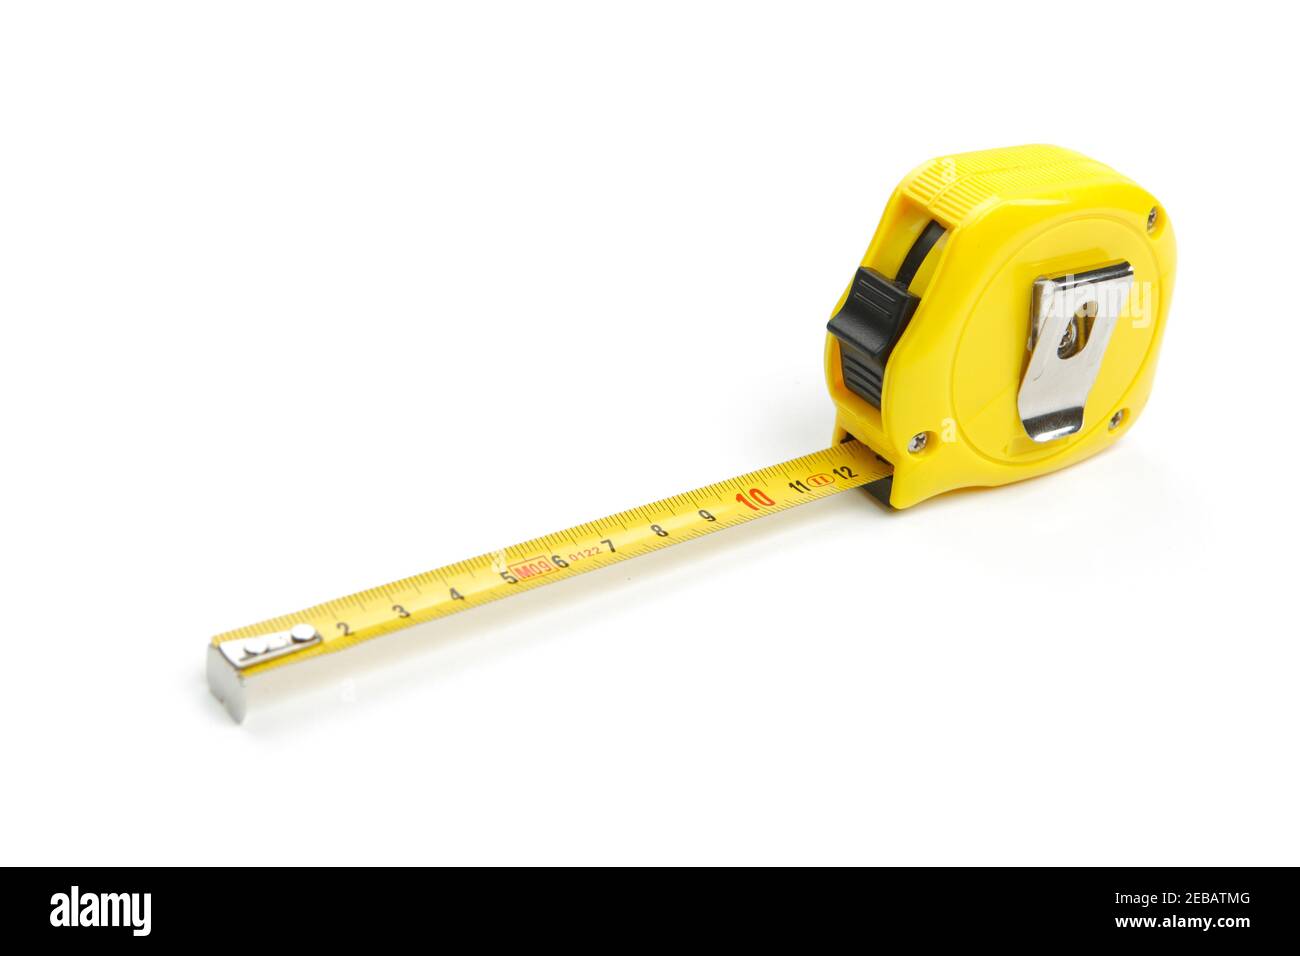 Partially unwound yellow tape measure, cut out and isolated on white background Stock Photo